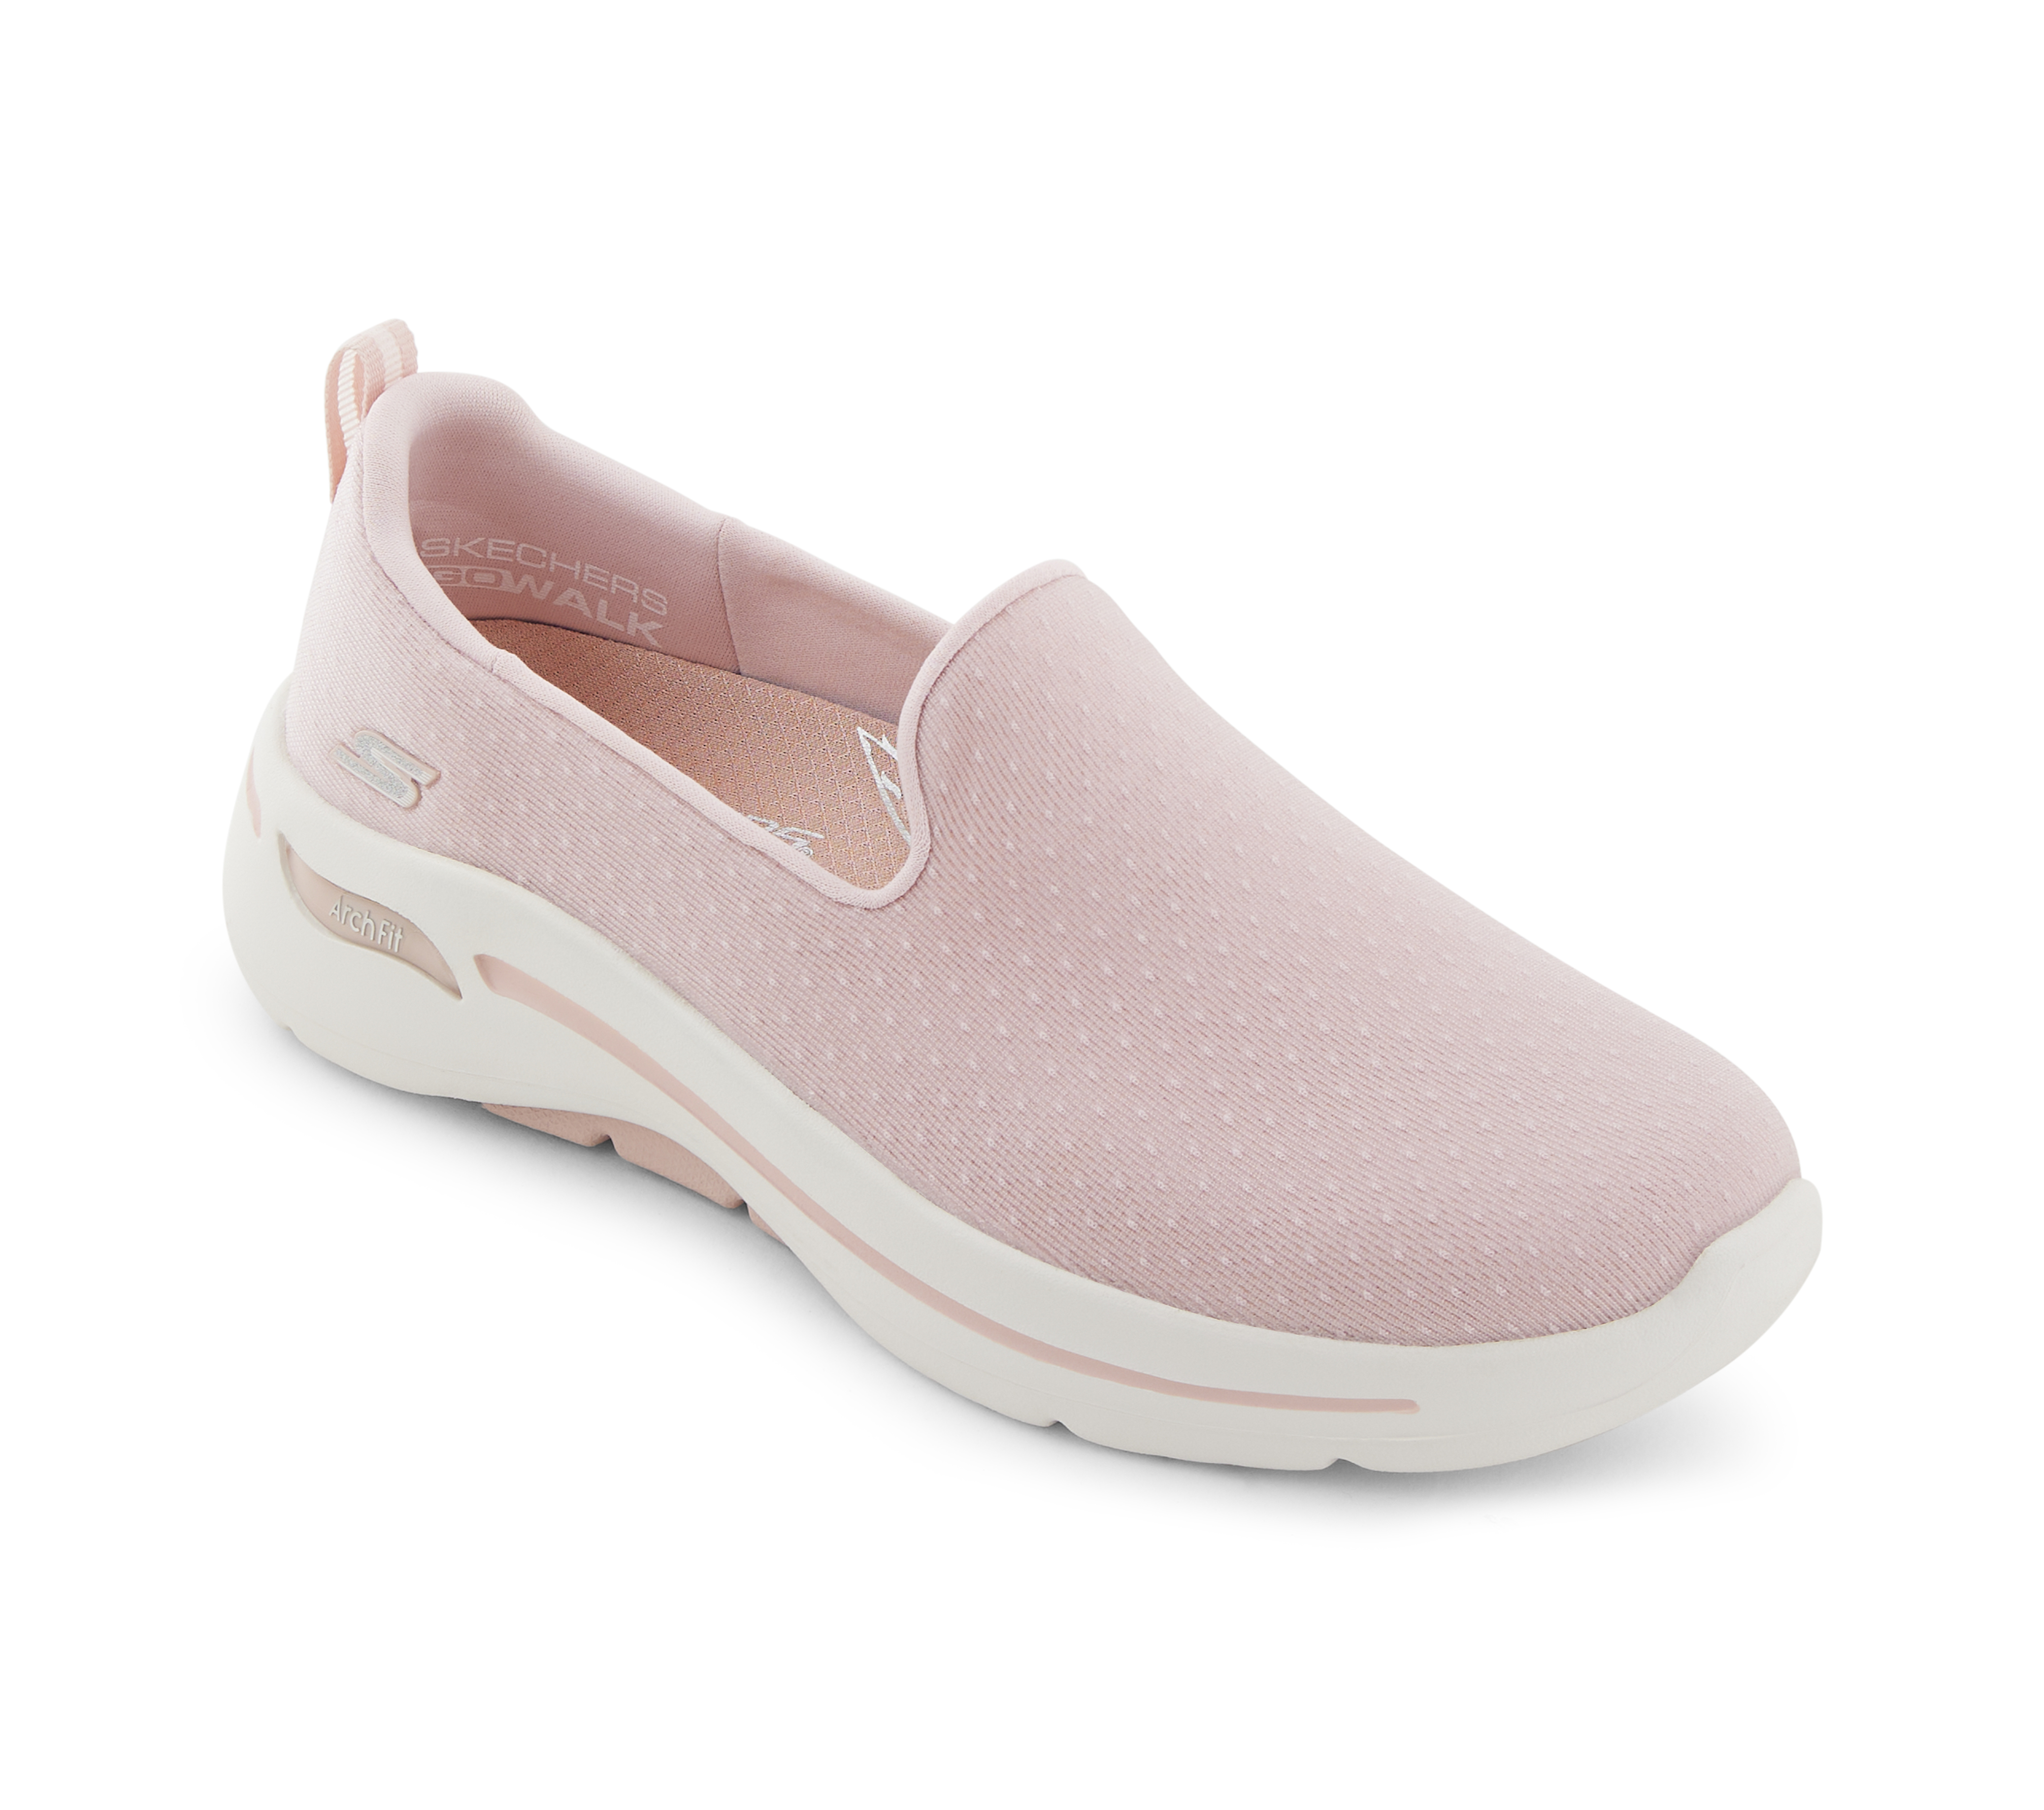 GO WALK ARCH FIT - MORNING ST, LLLIGHT PINK Footwear Lateral View